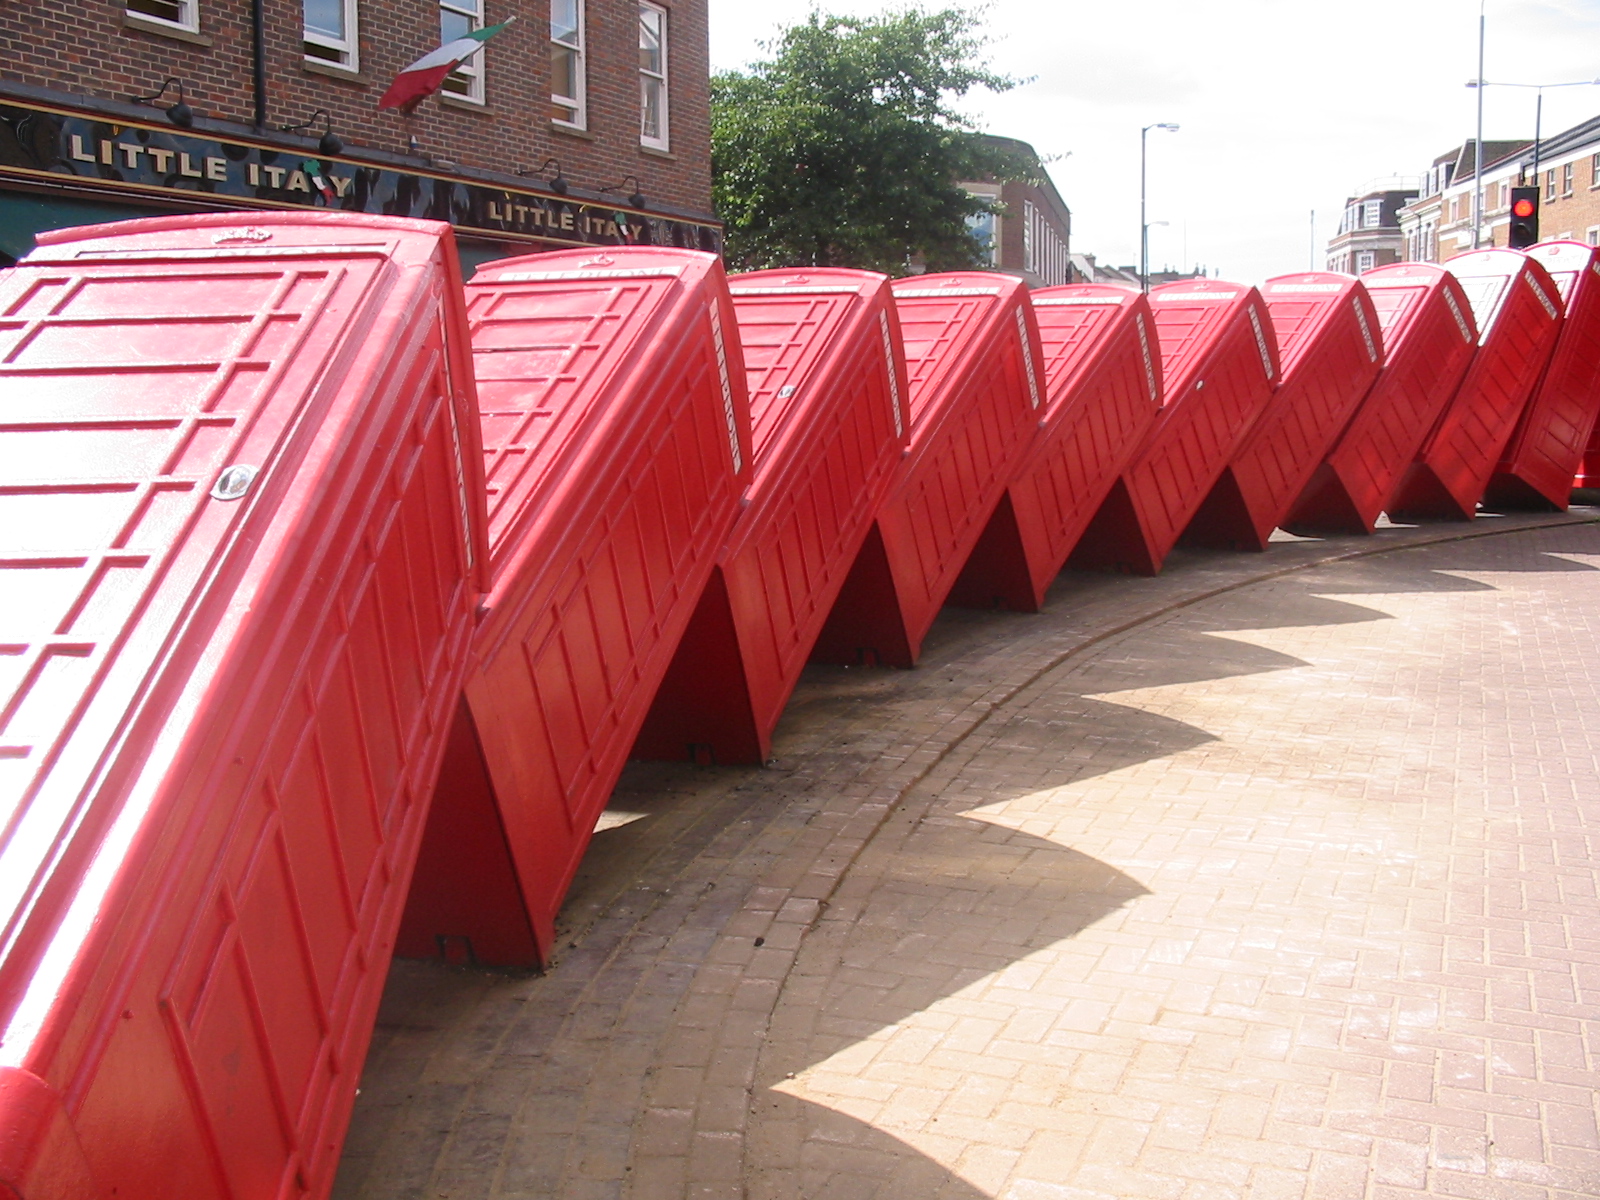 [phoneboxes-phone-box-red-stacked-domino-in-London-Kingston-England-RF.jpg]